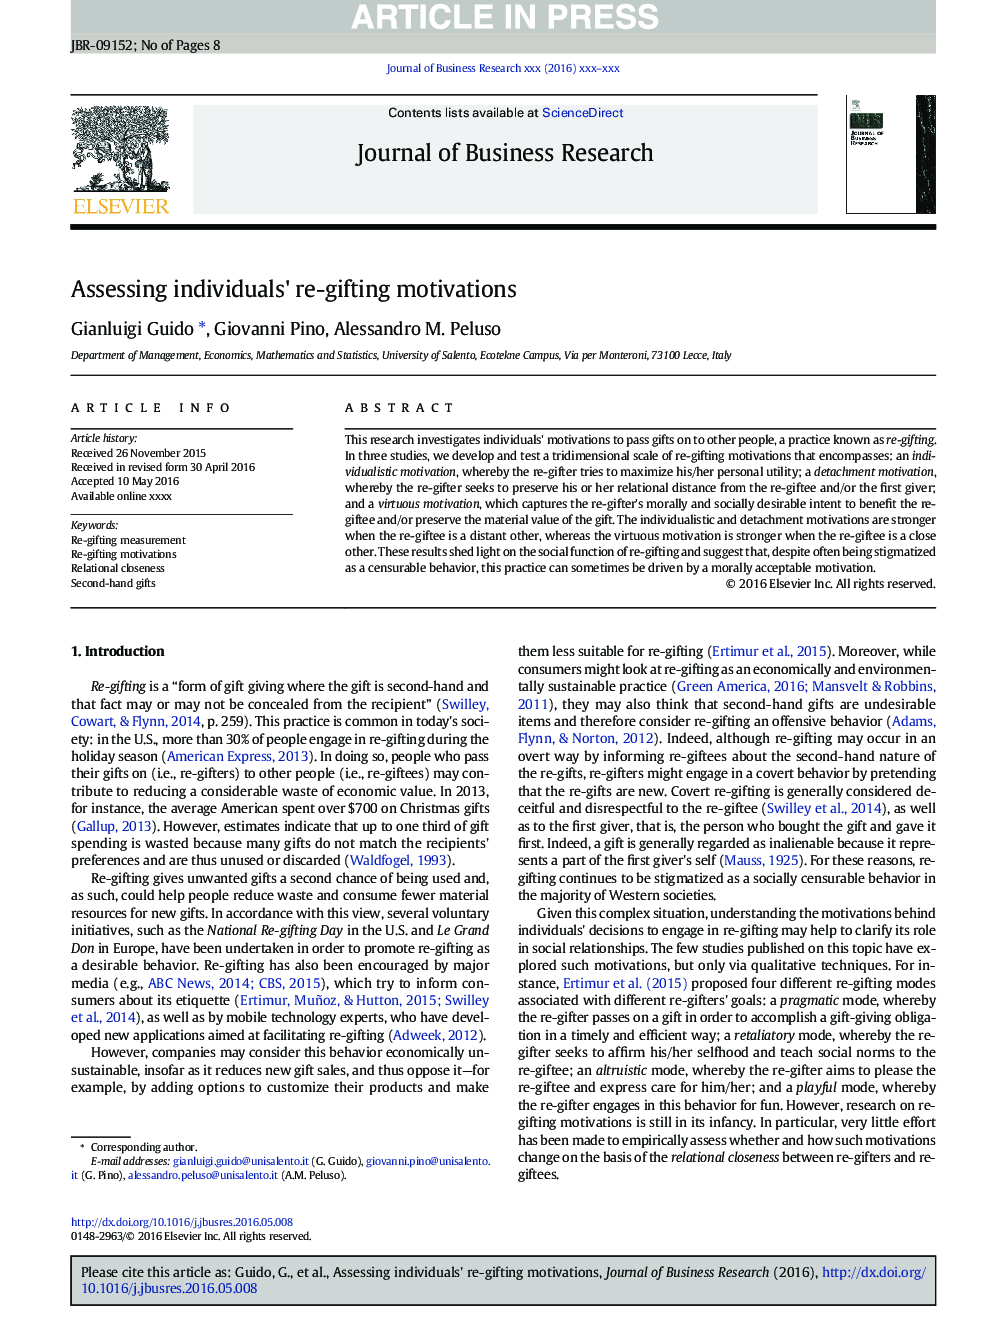 Assessing individuals' re-gifting motivations